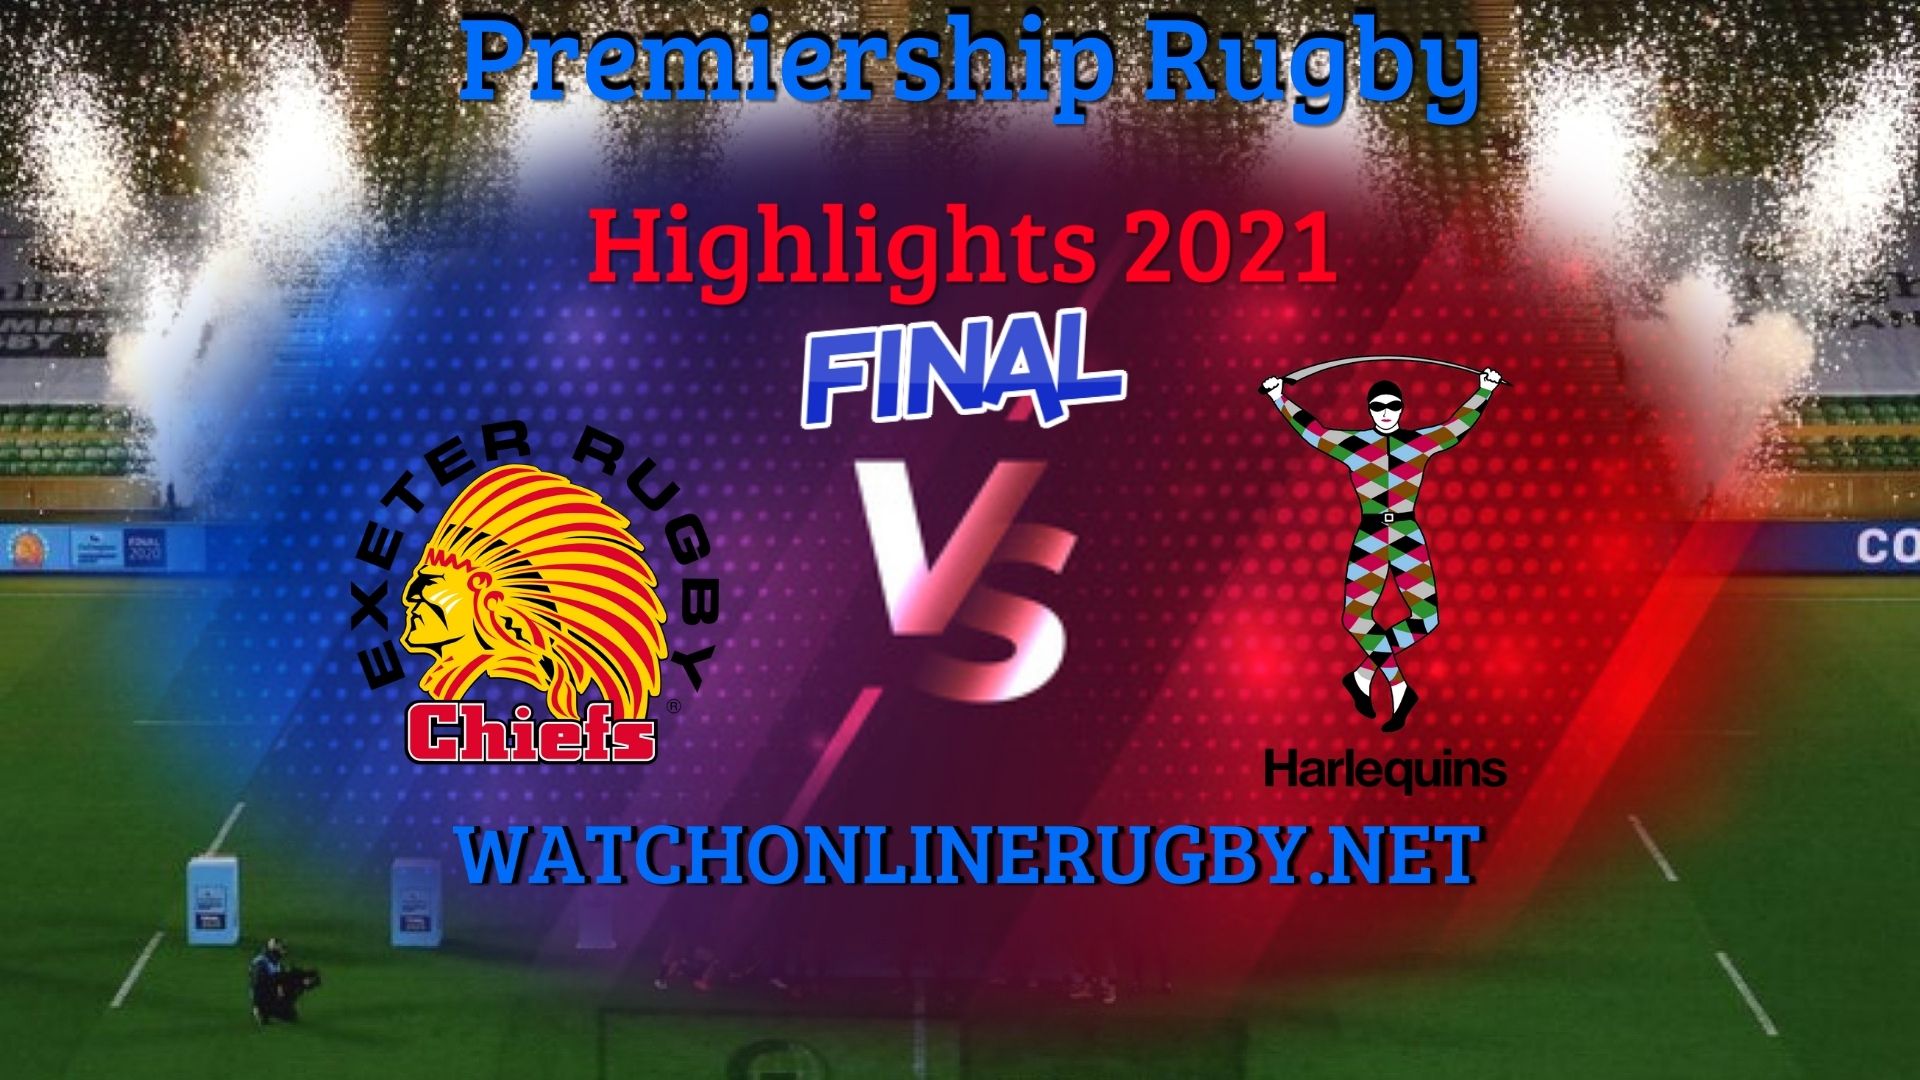 Exeter Chiefs Vs Harlequins Premiership Rugby 2021 Final